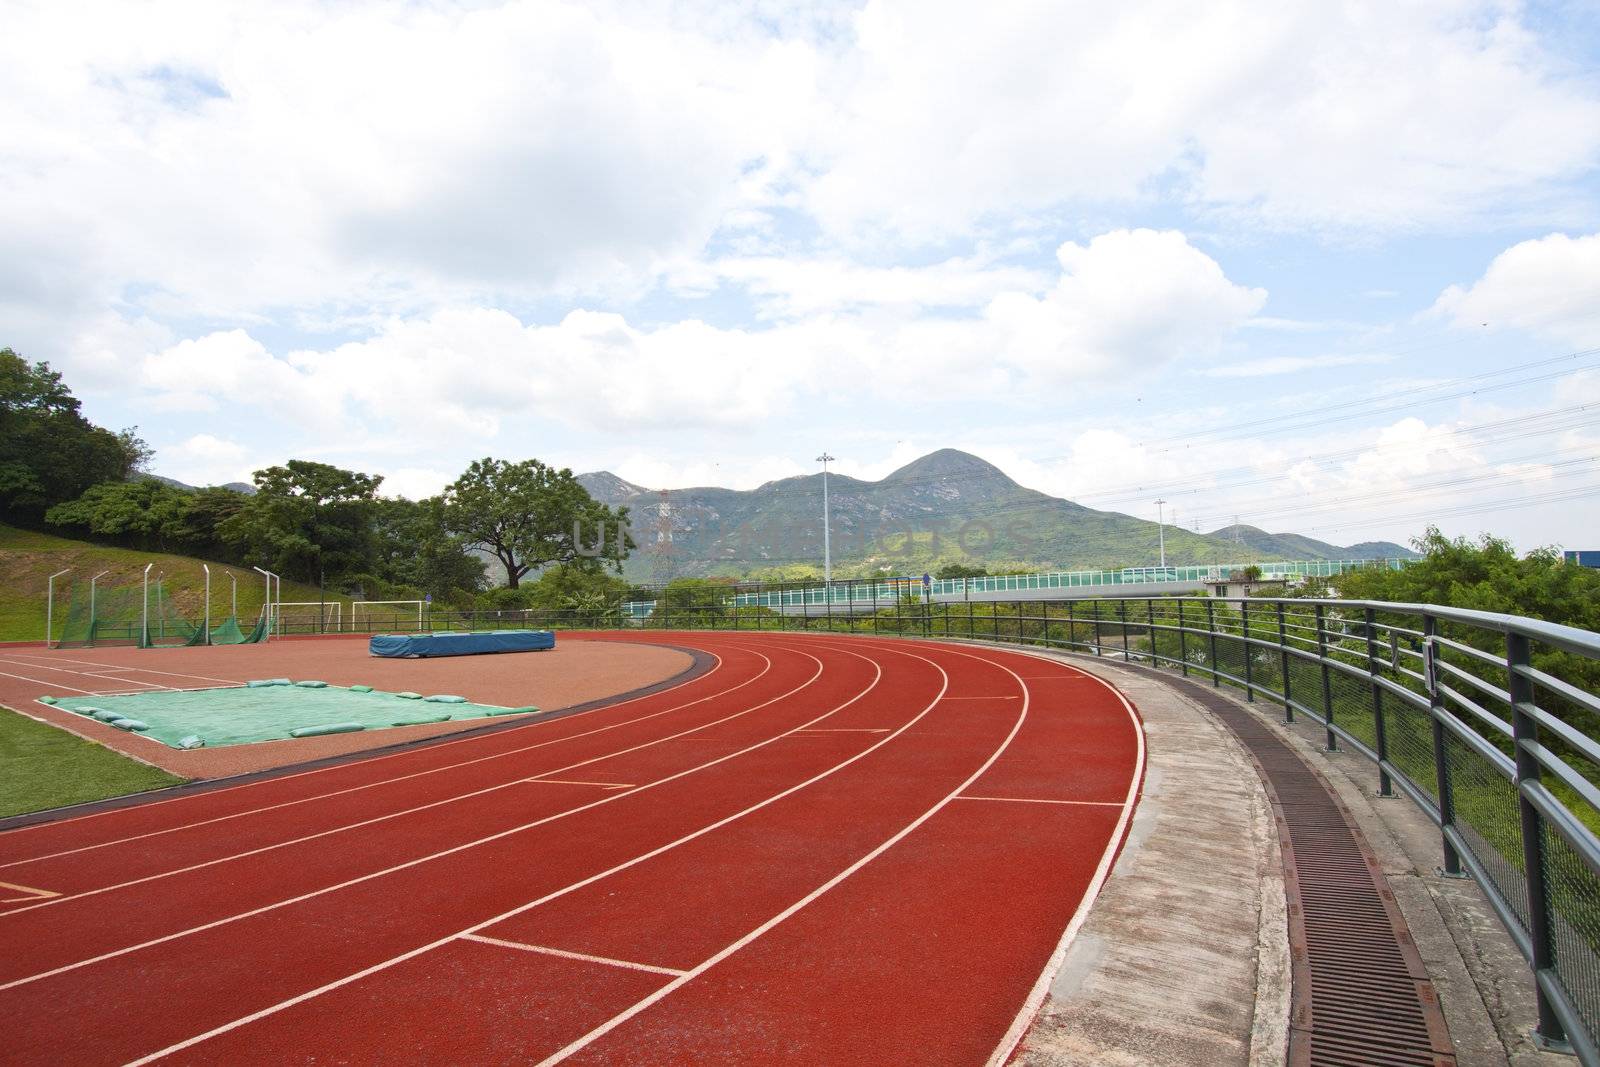 Sports stadium with running track at day by kawing921